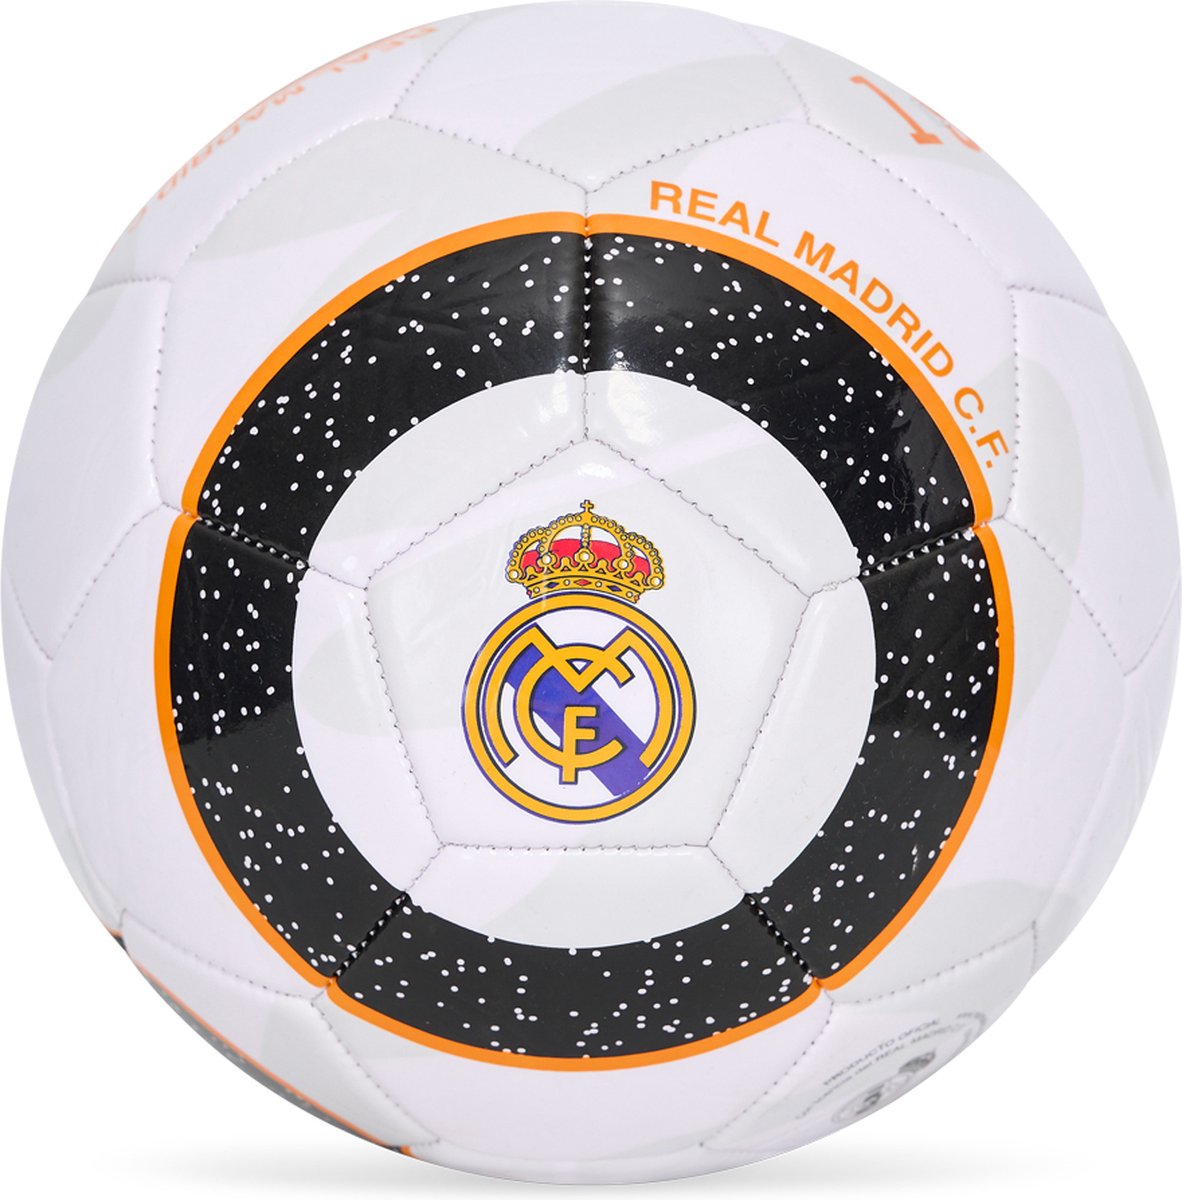 Real Madrid Galáctico voetbal - One size - maat One size